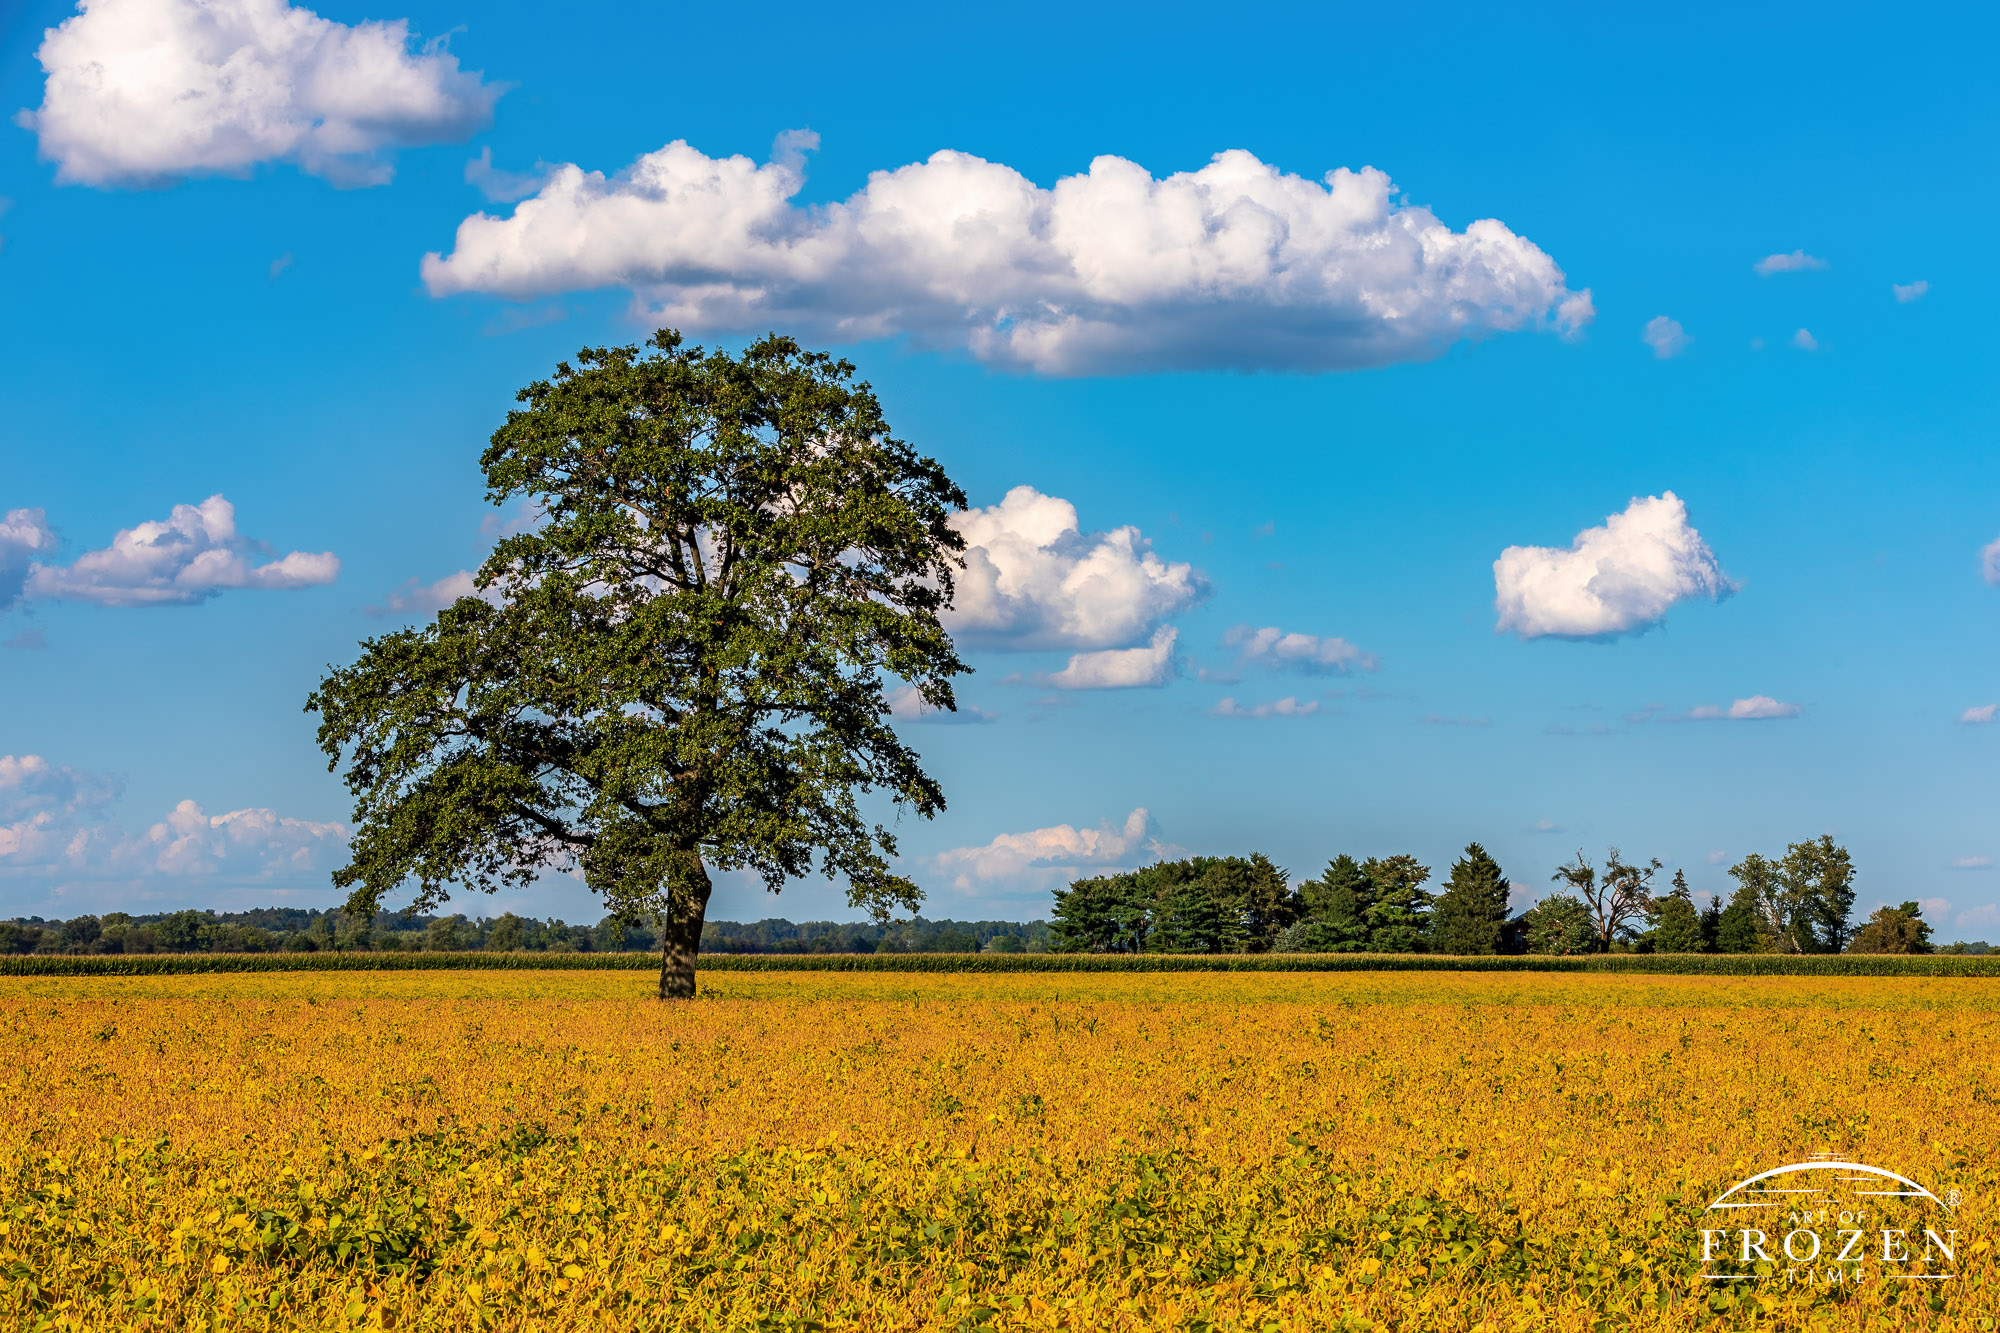 A solitary tree standing in a field of golden soybeans and blue skies